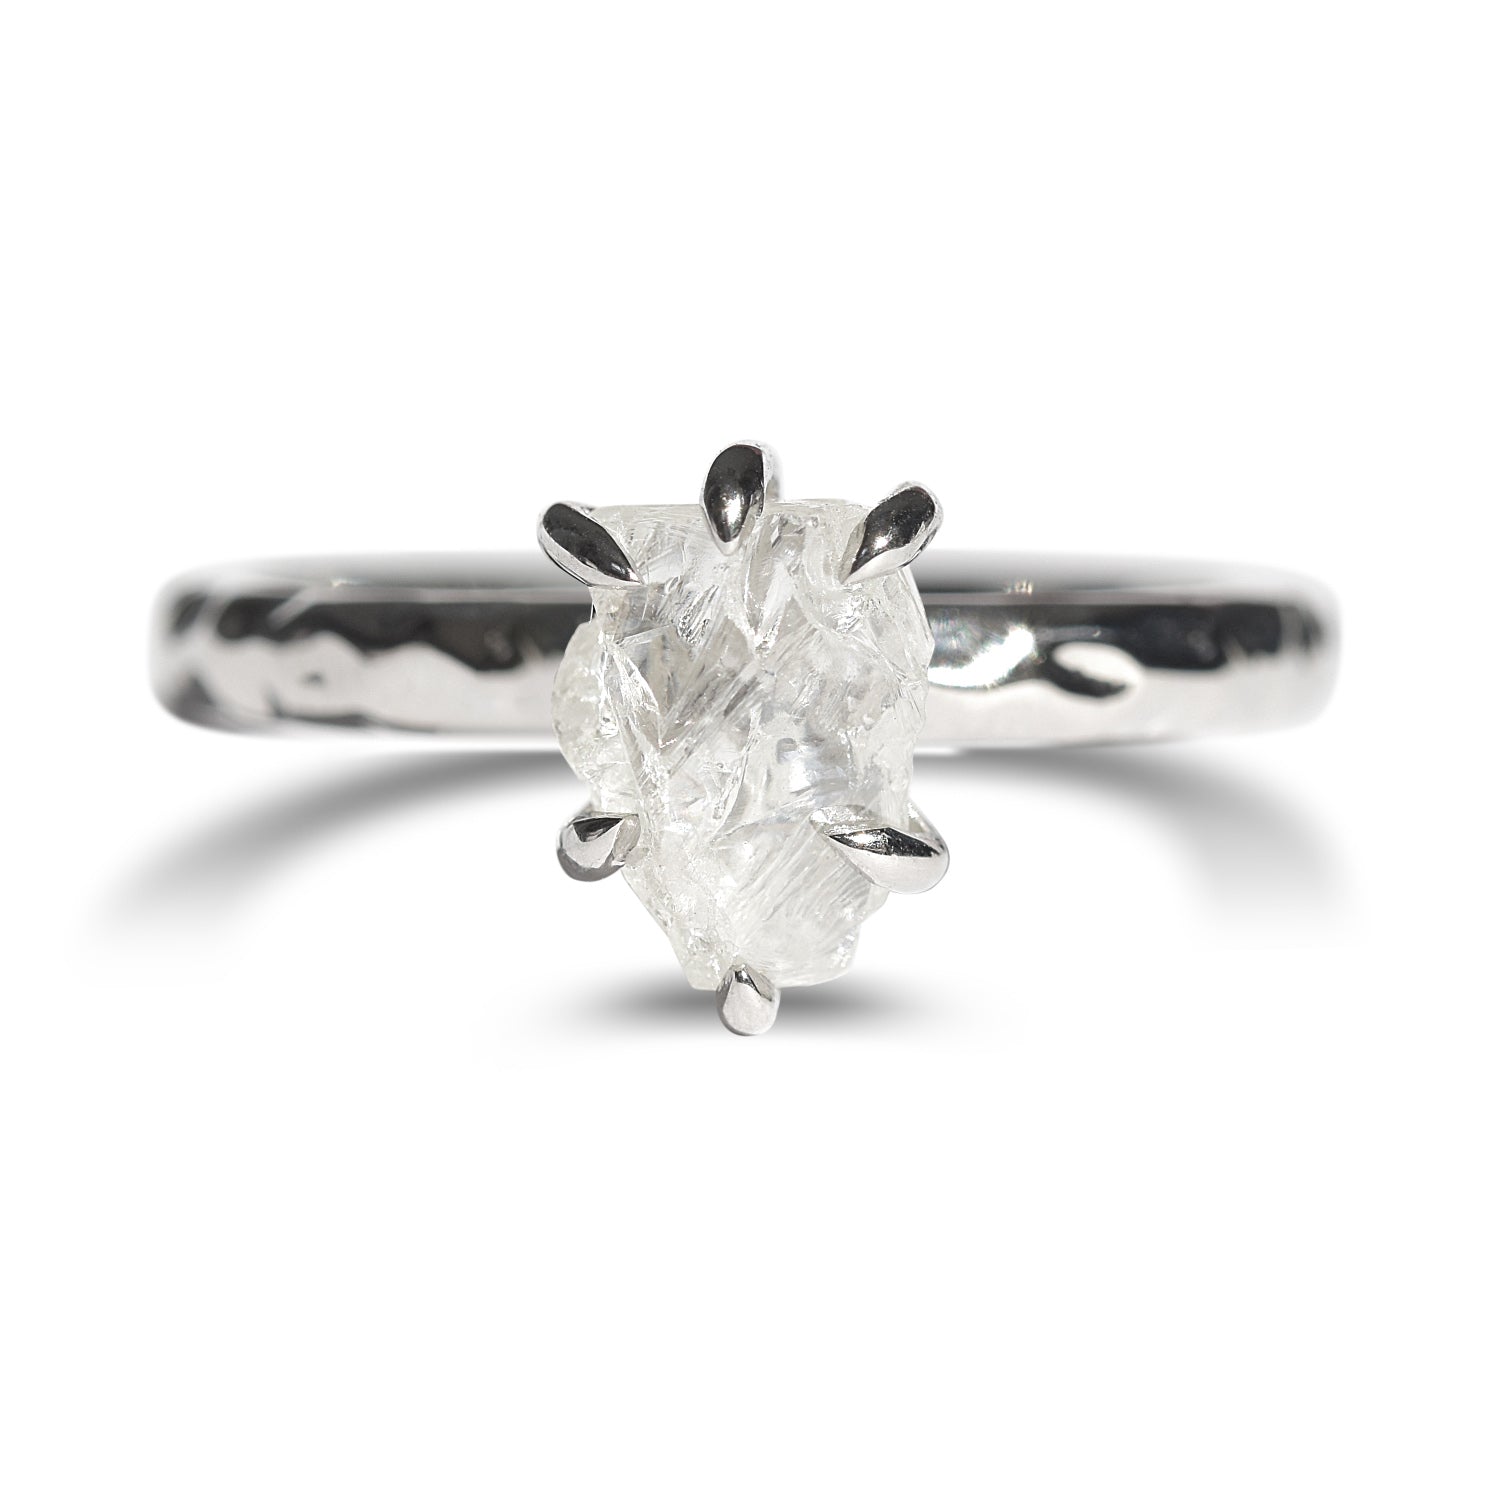 Avens Asymmetrical Raw Diamond with Champagne Ombré Ring 1.0ct - Bario Neal